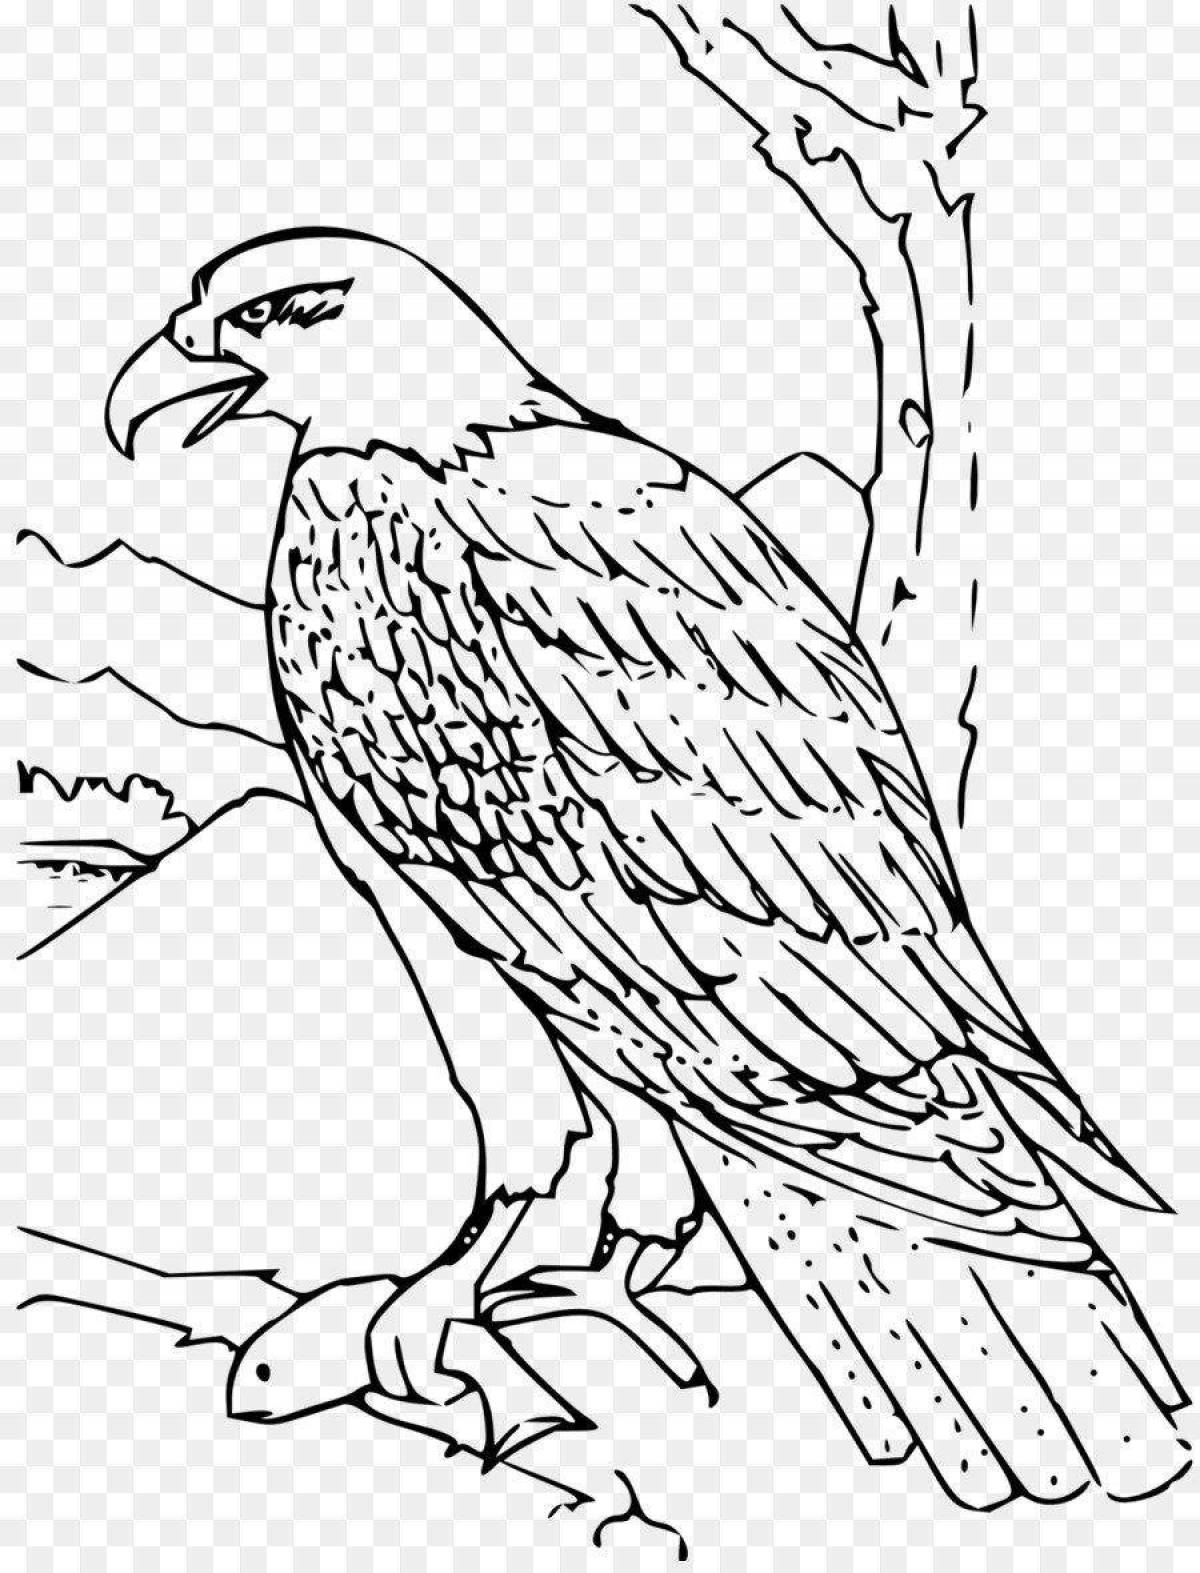 High eagle coloring page